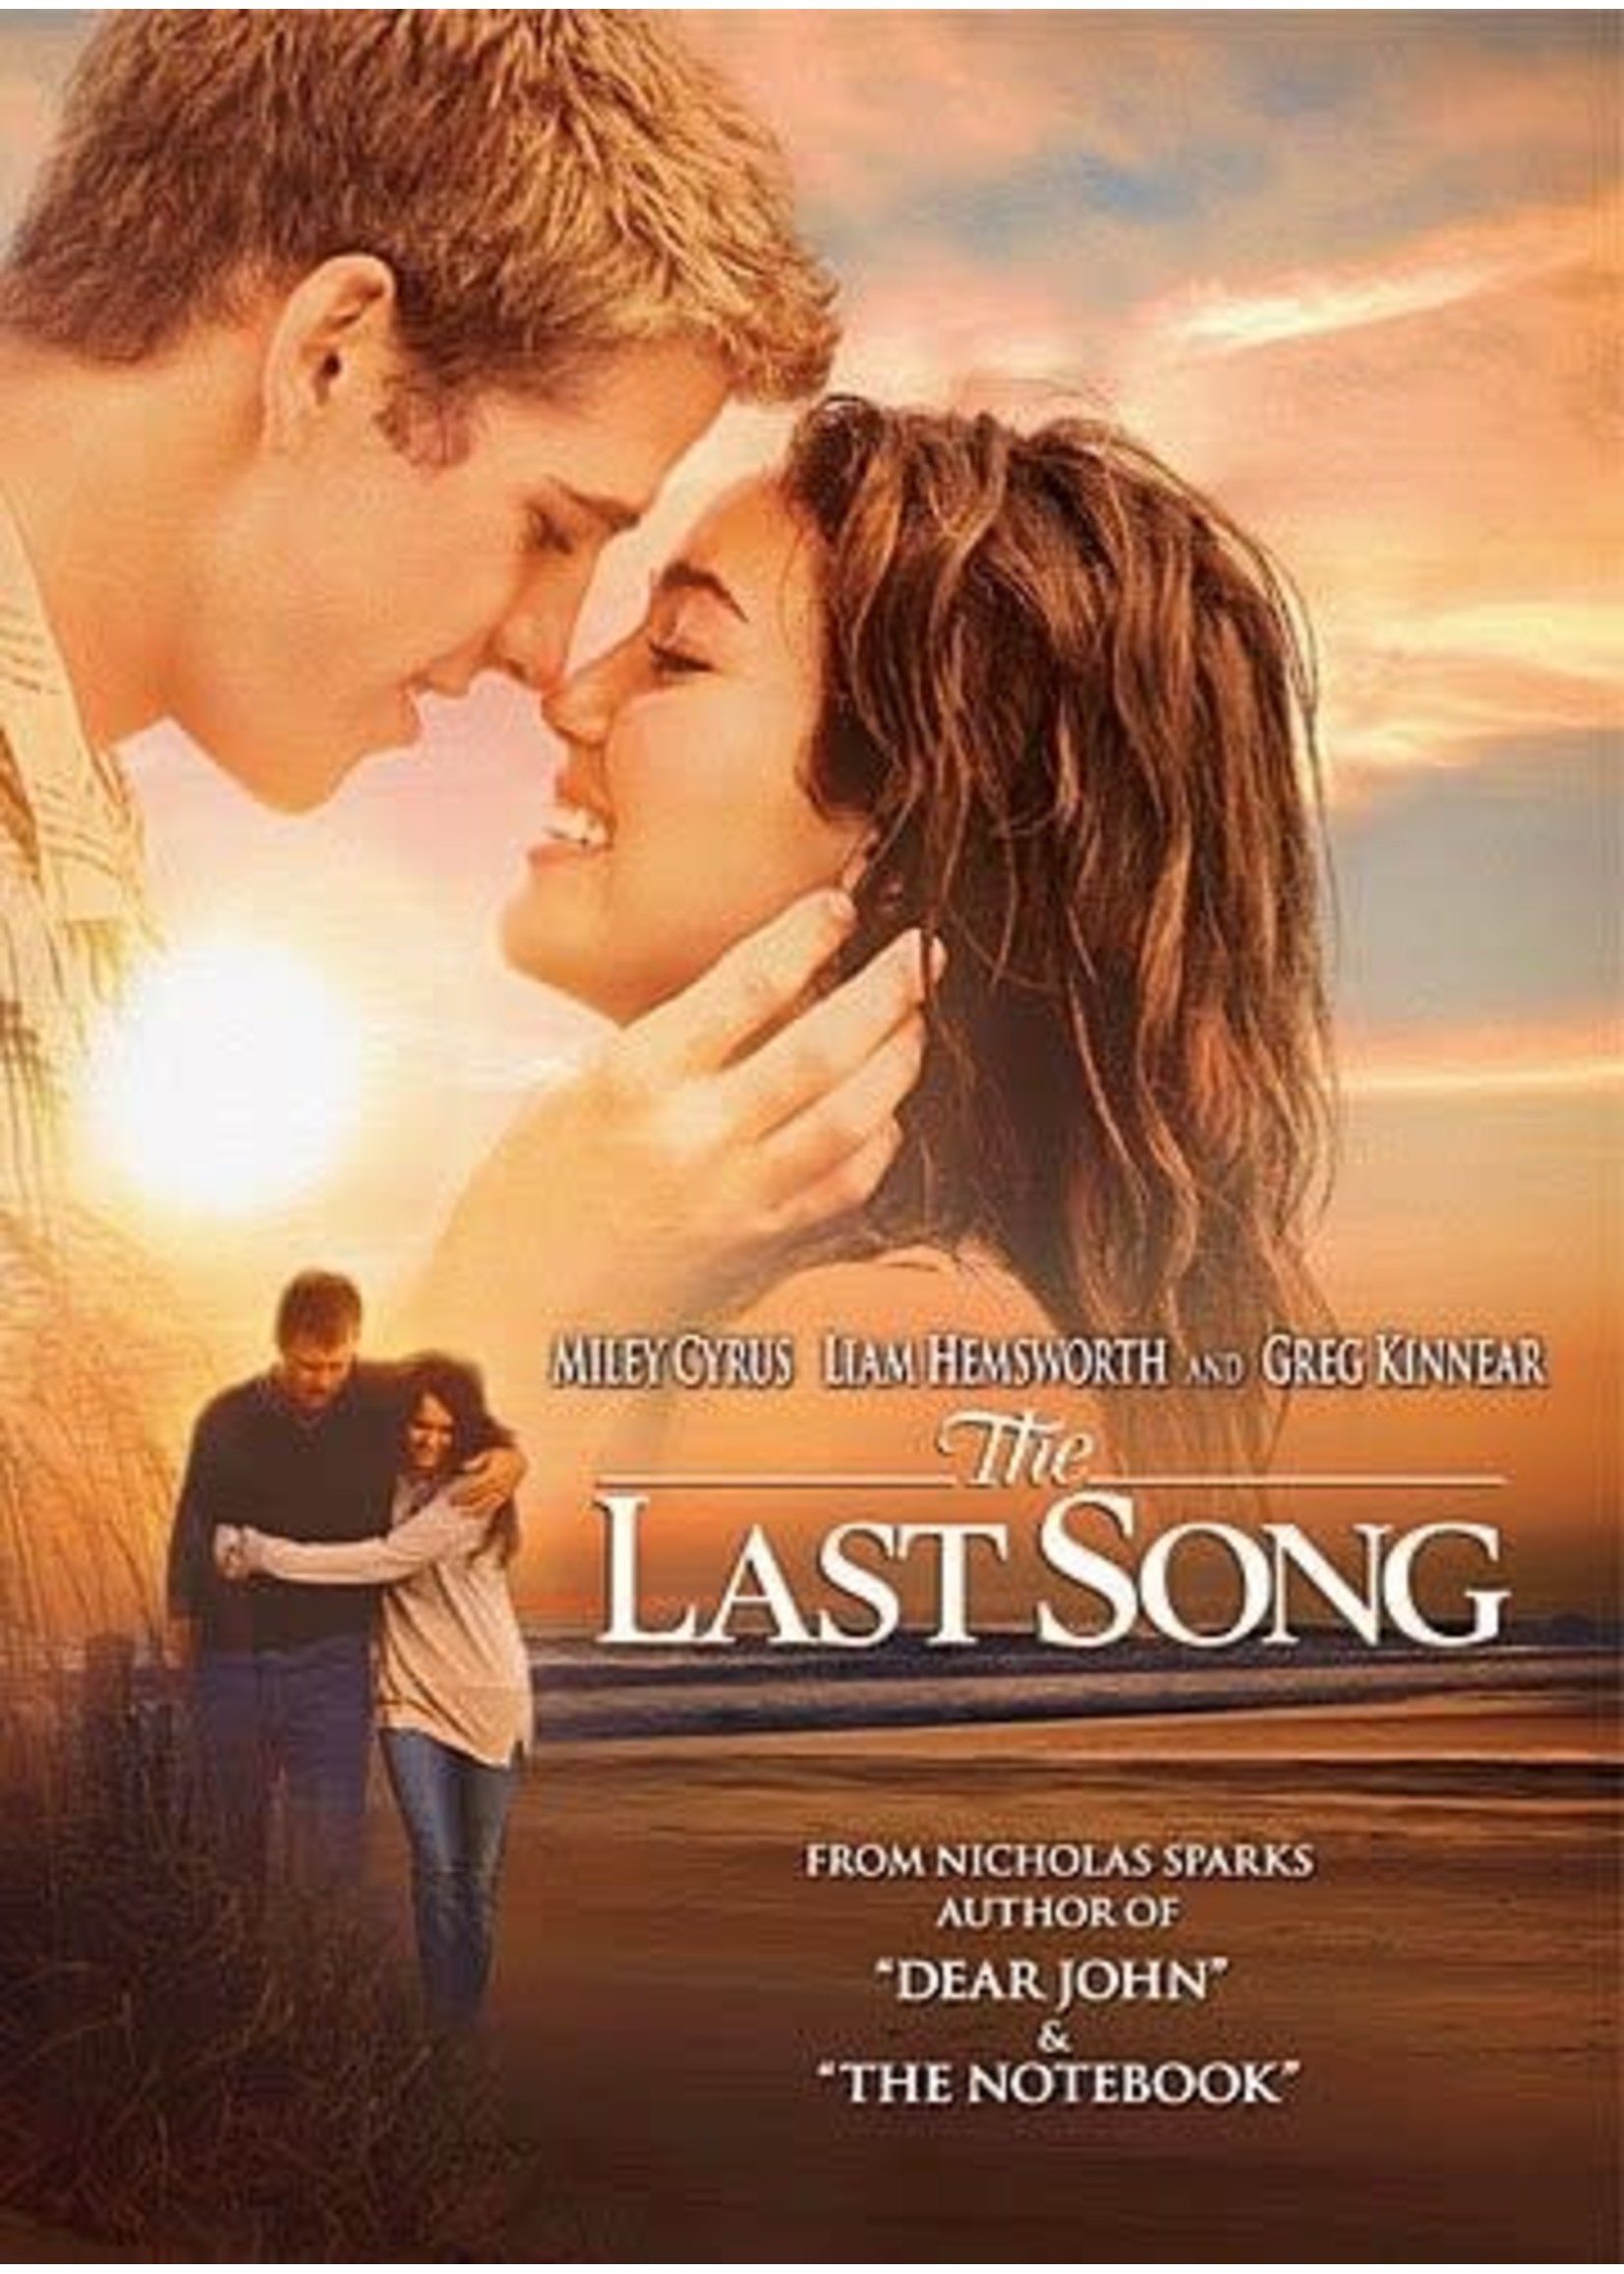 The Last Song (DVD)